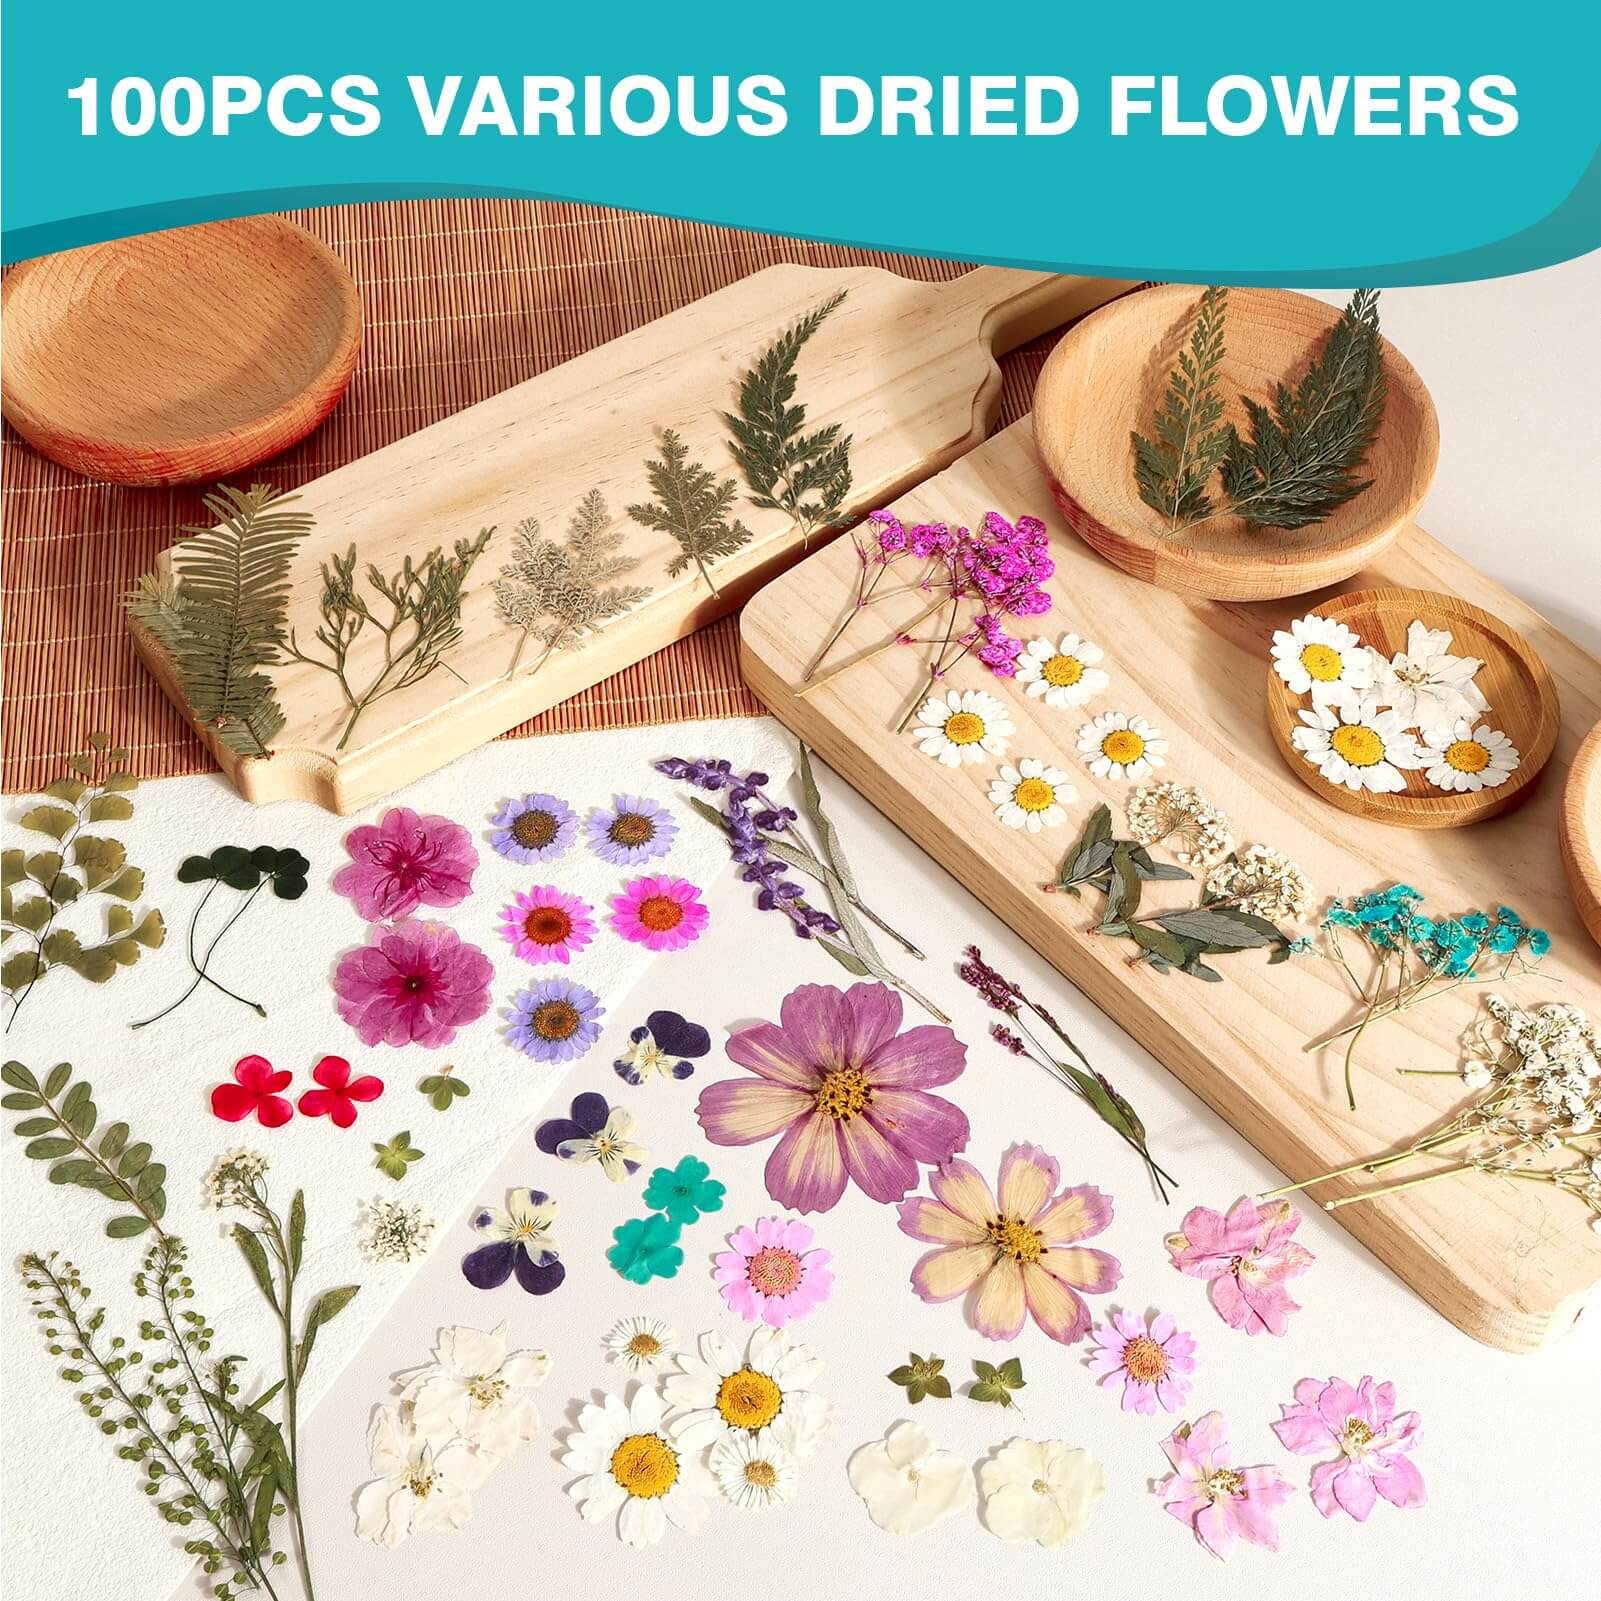 BIHRTC 100PCS Dried Flowers for Resin Real Dry Flower Natural Pressed Died  Leaves Sunflowers Chrysanthemum Resin Flowers Small Colorful Pressed